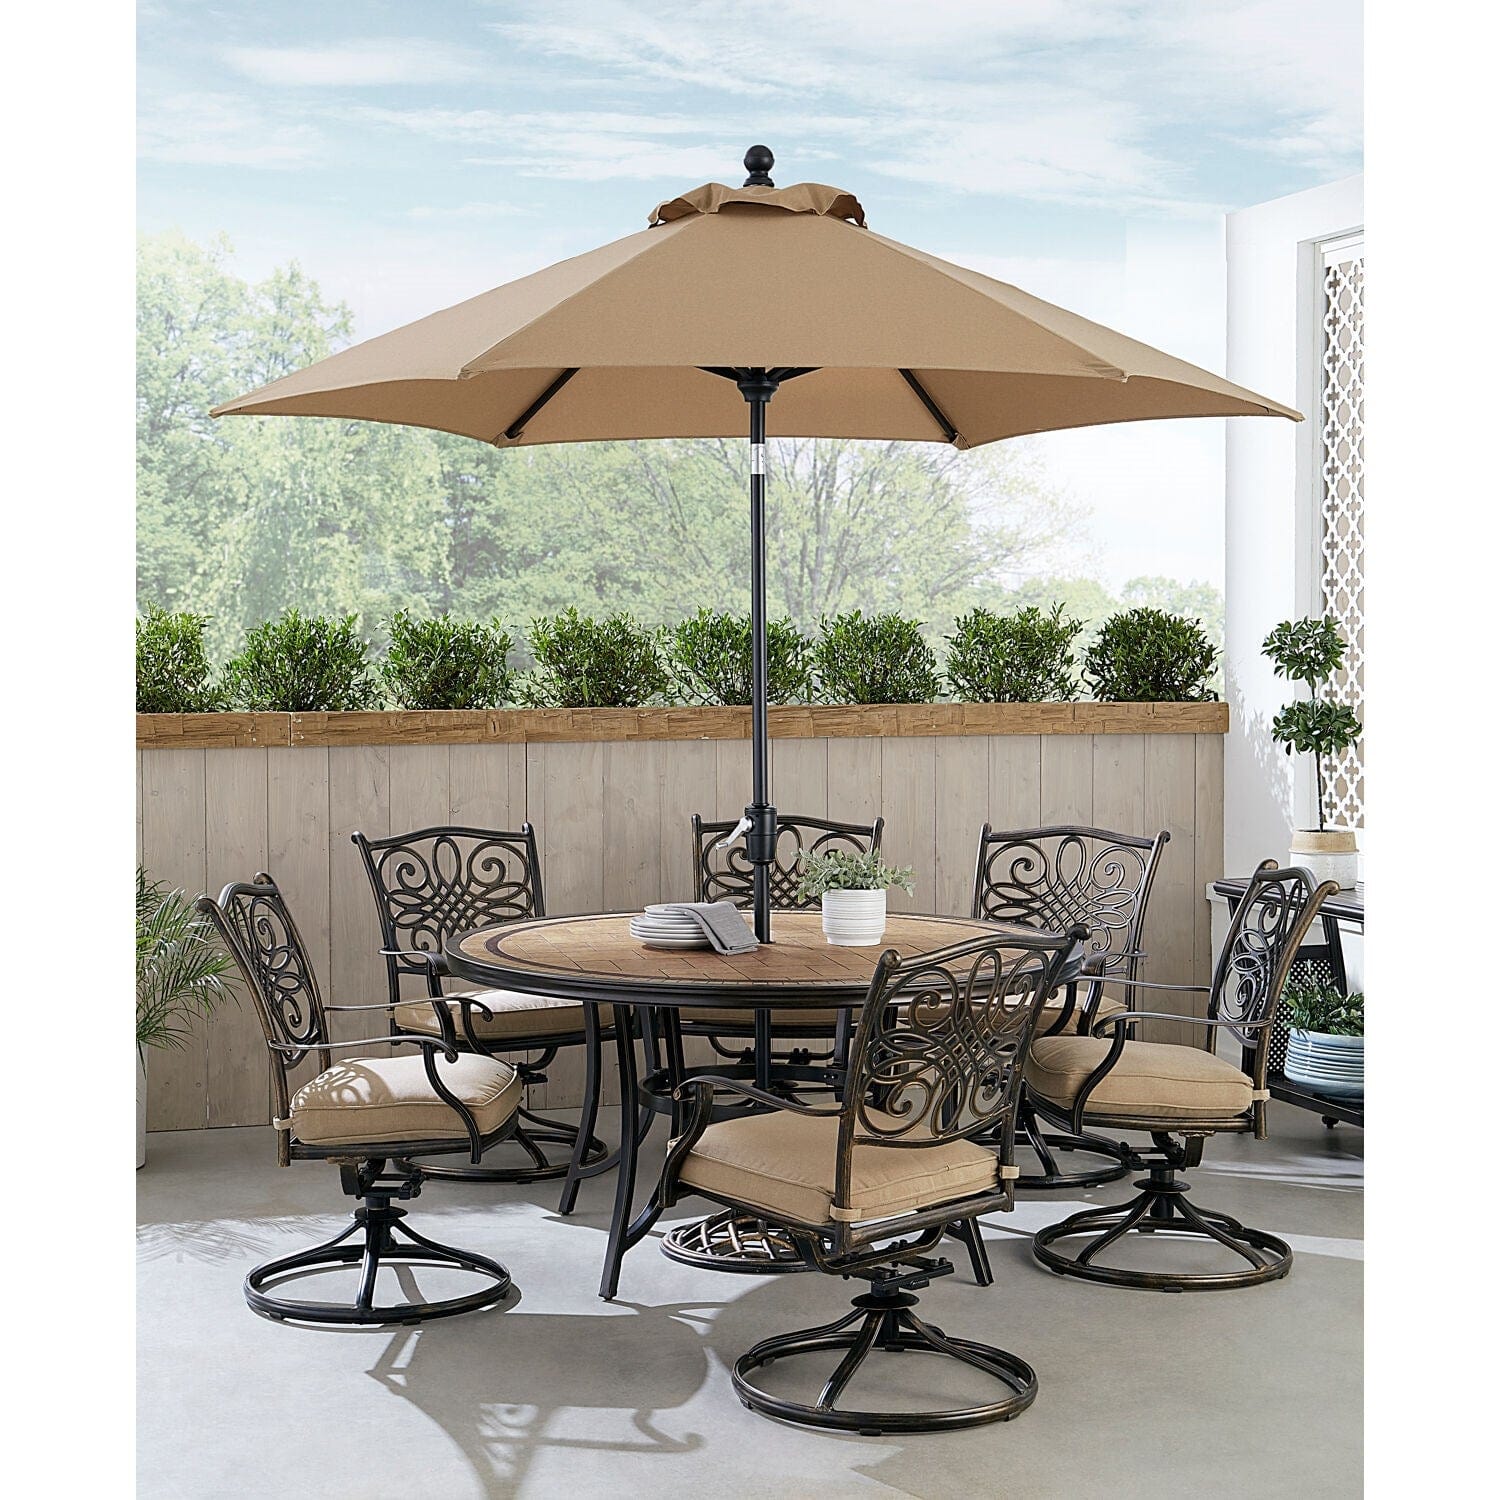 Hanover Outdoor Dining Set Hanover Monaco 7-Piece Dining Set in Tan with Six Swivel Rockers, 60-in. Tile-Top Table and 9-Ft. Umbrella | MONDN7PCSW6RDTLC-SU-T